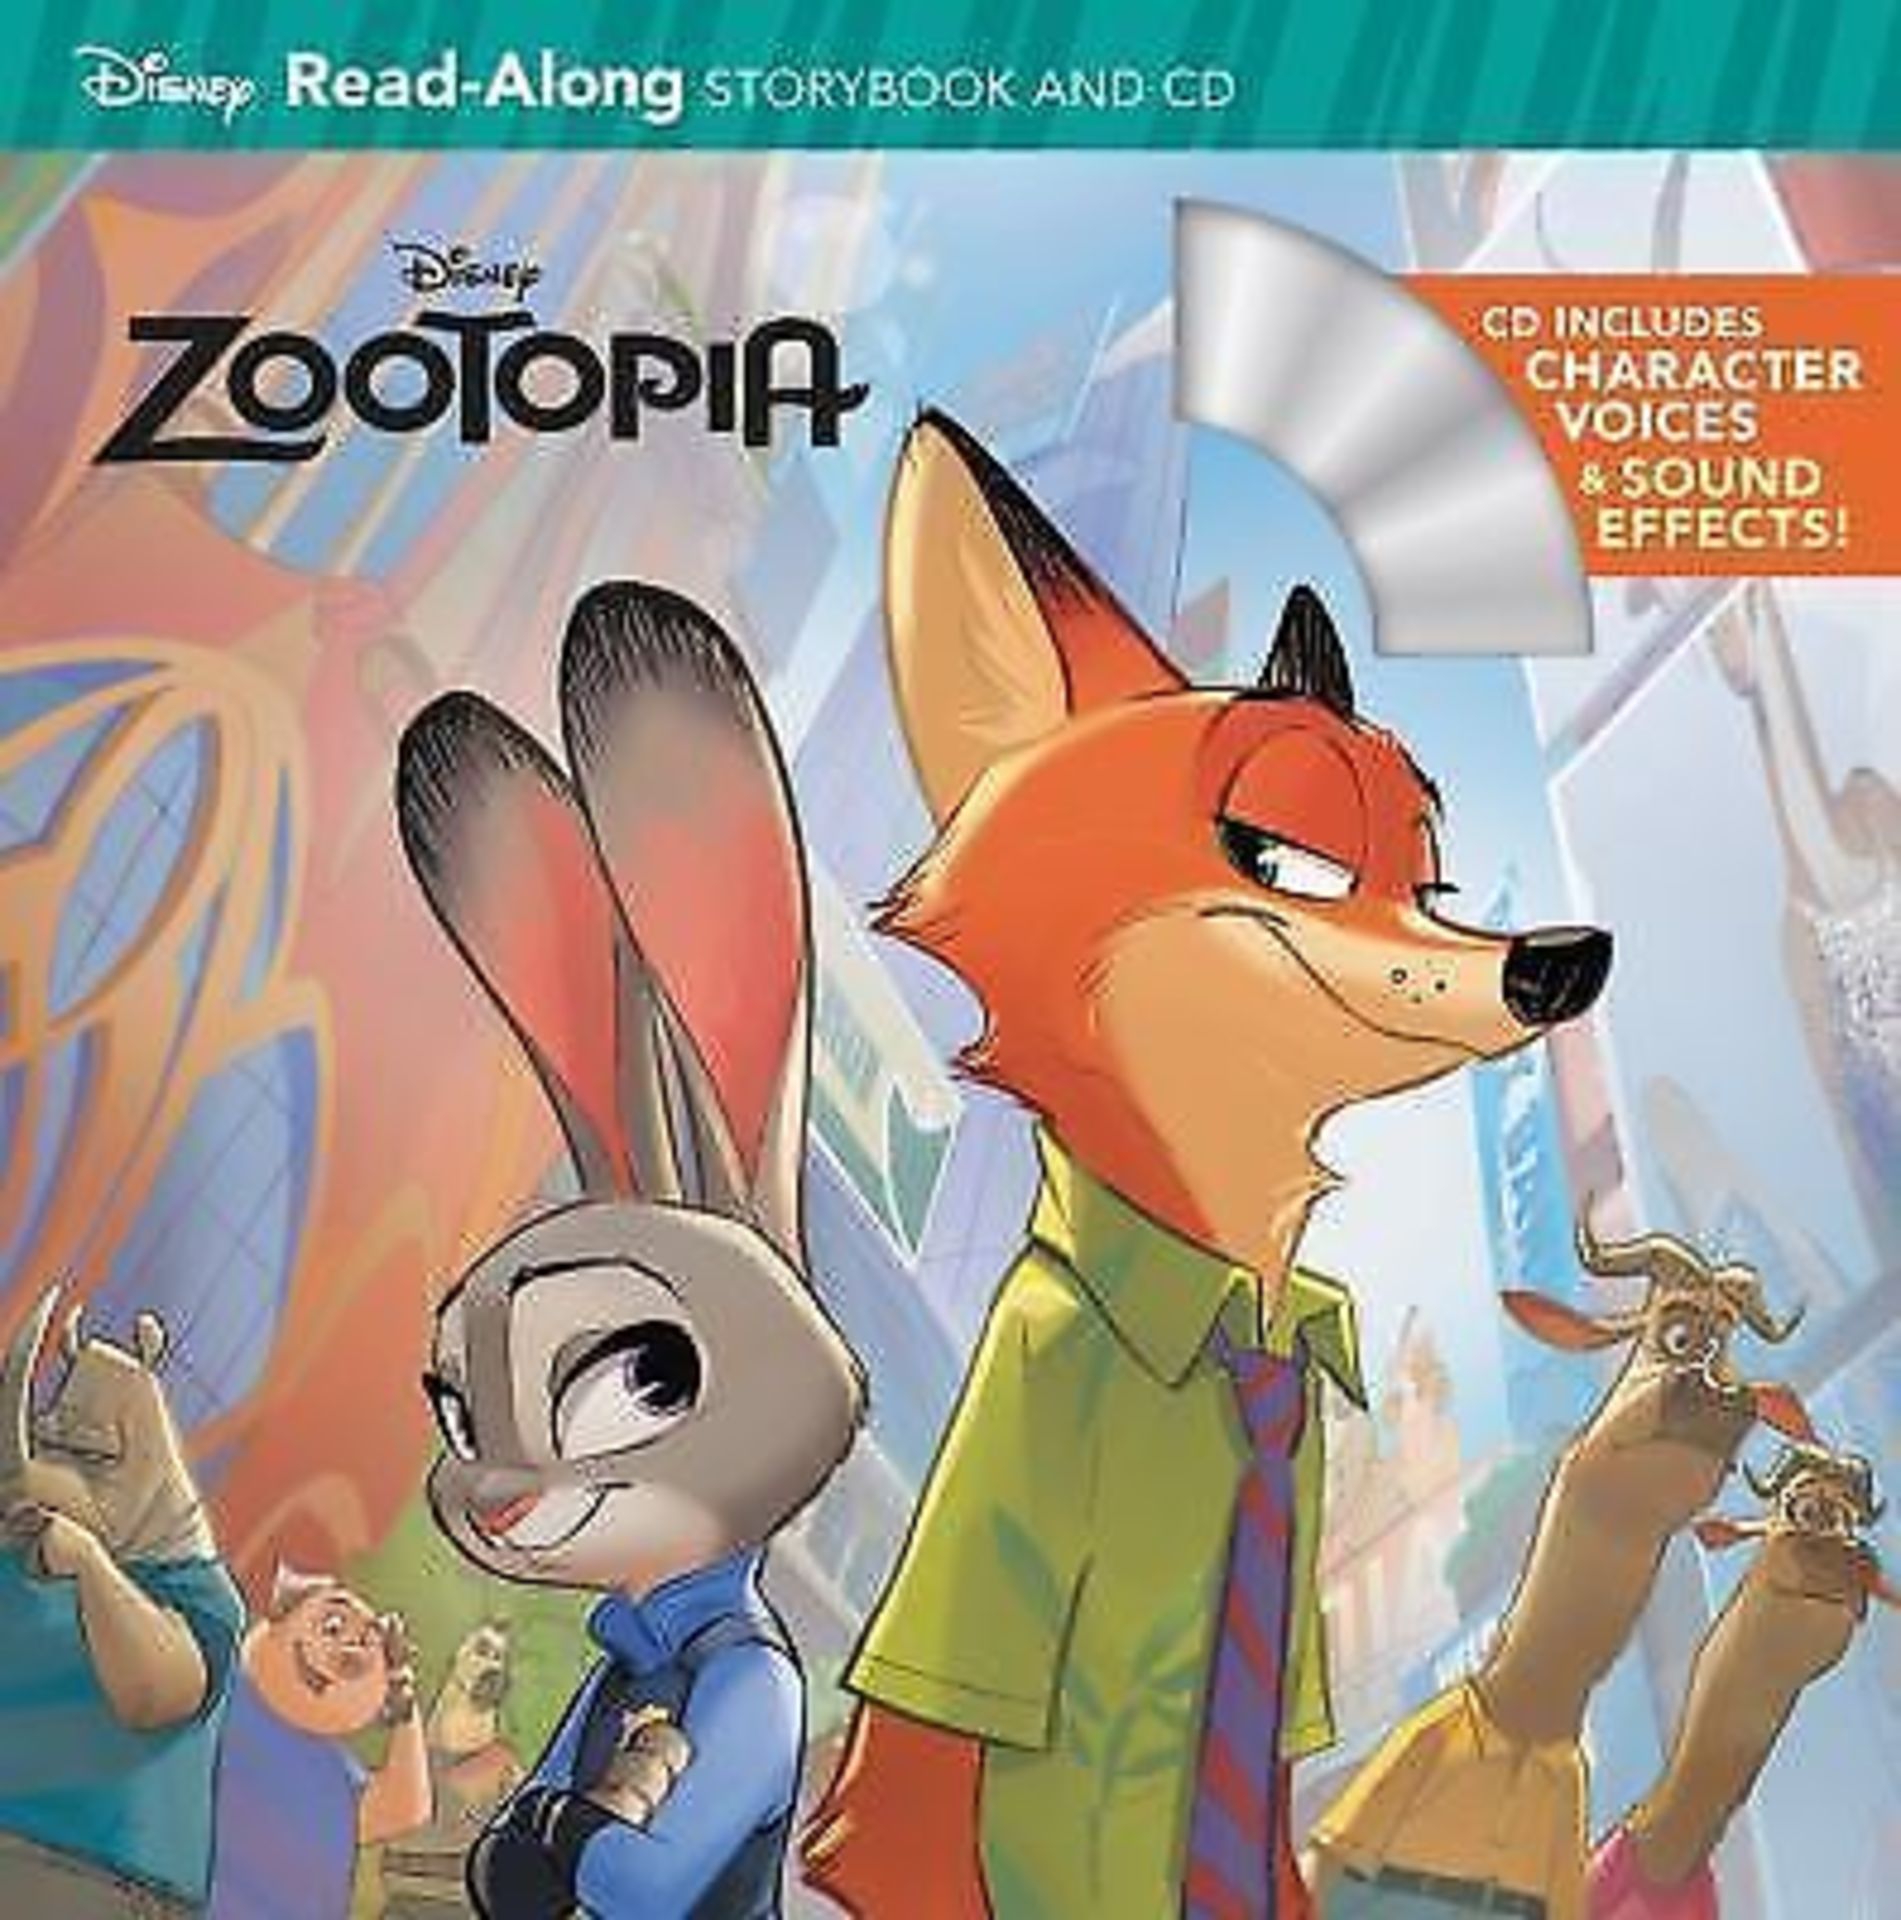 LOT OF 100 ZOOTOPIA READ ALONG STORYBOOK & CD